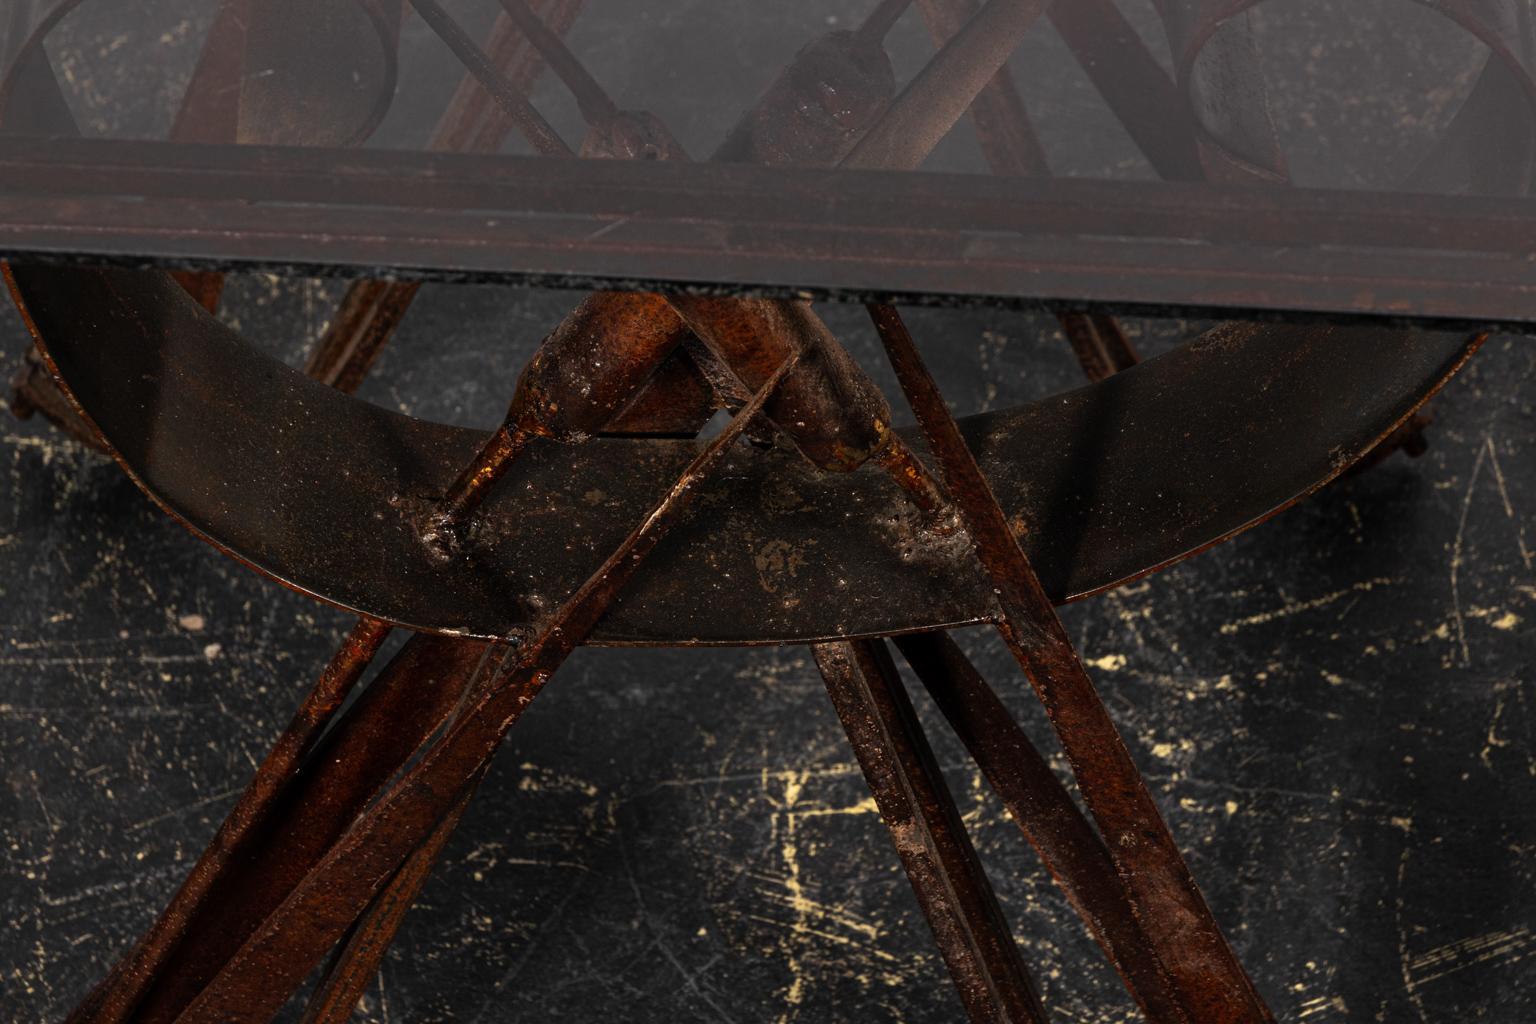 Pair of cat tail iron side tables with black glass tops. Please note of wear consistent with age including heavy oxidation and a distressed finish to the iron base.